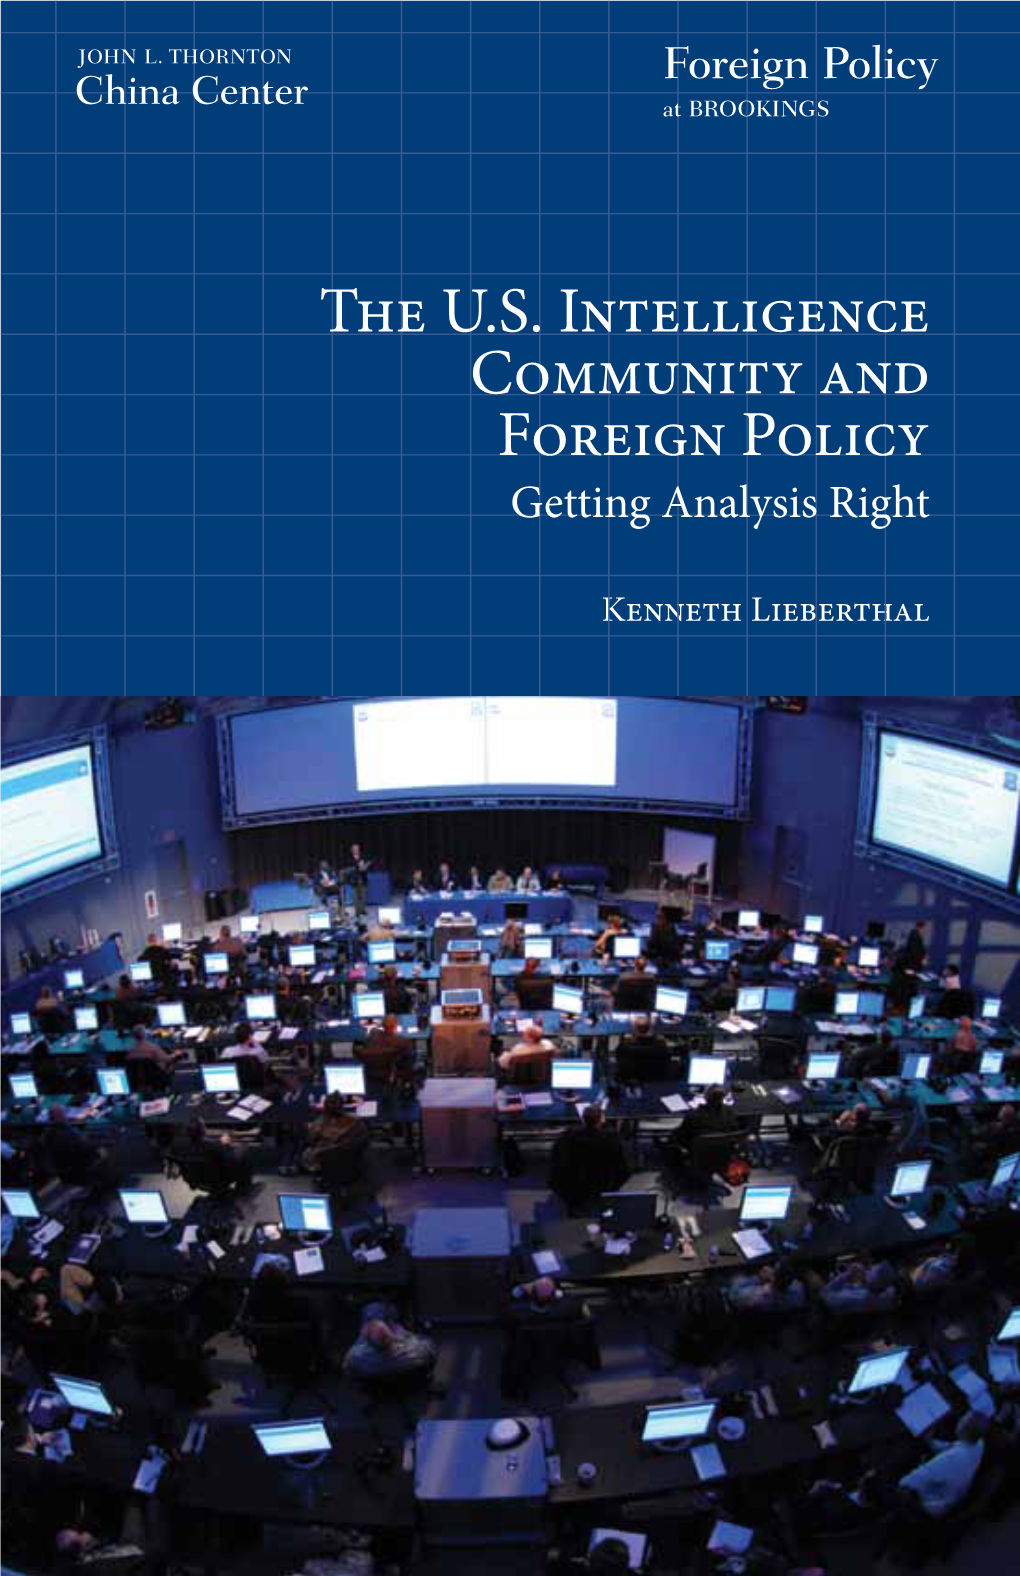 The U.S. Intelligence Community and Foreign Policy Getting Analysis Right